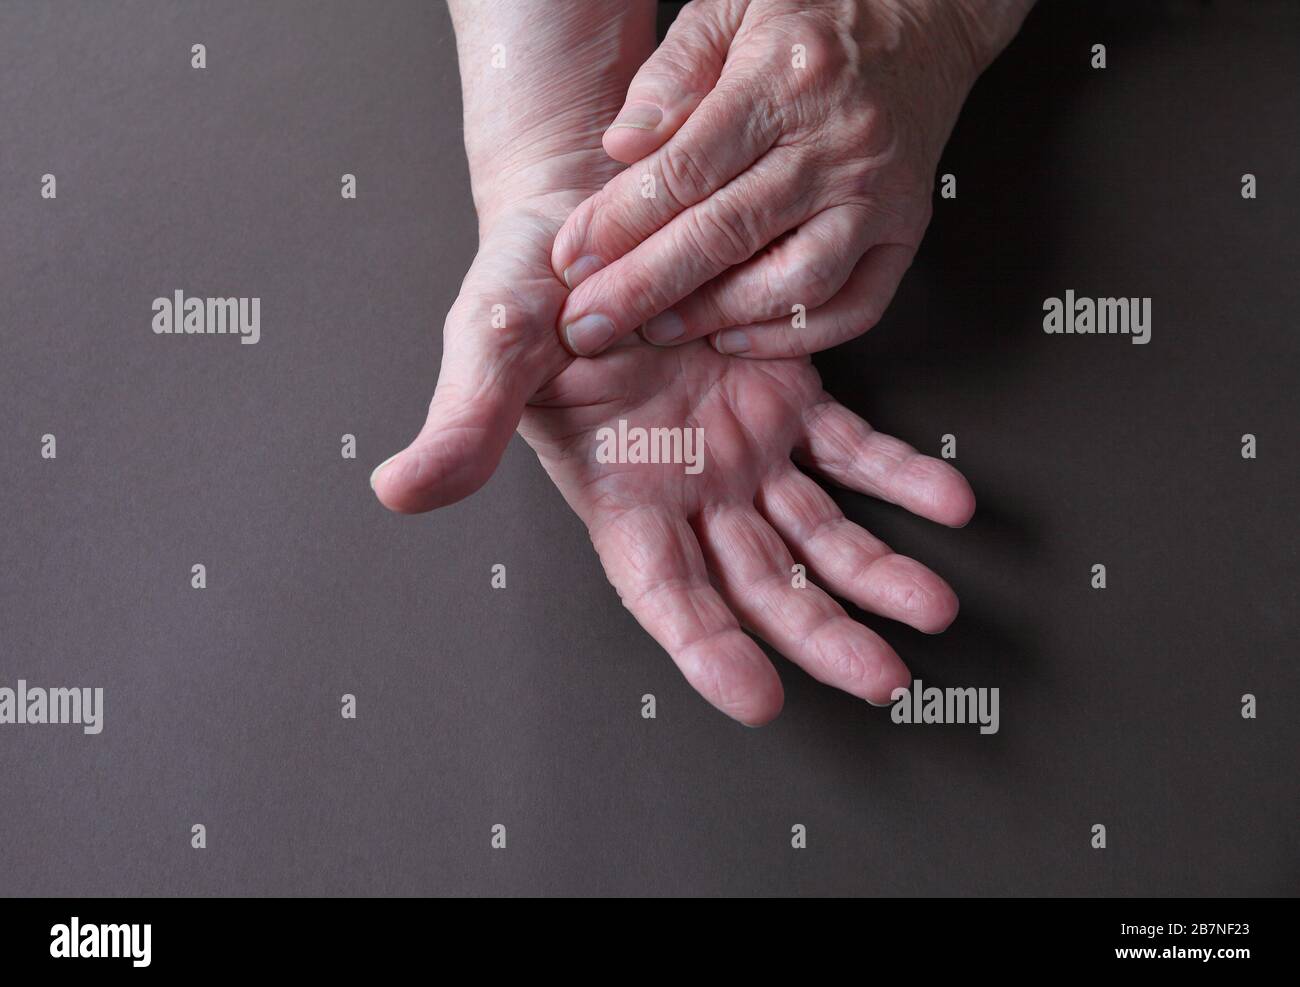 An older man indicates an area of pain on his thumb Stock Photo